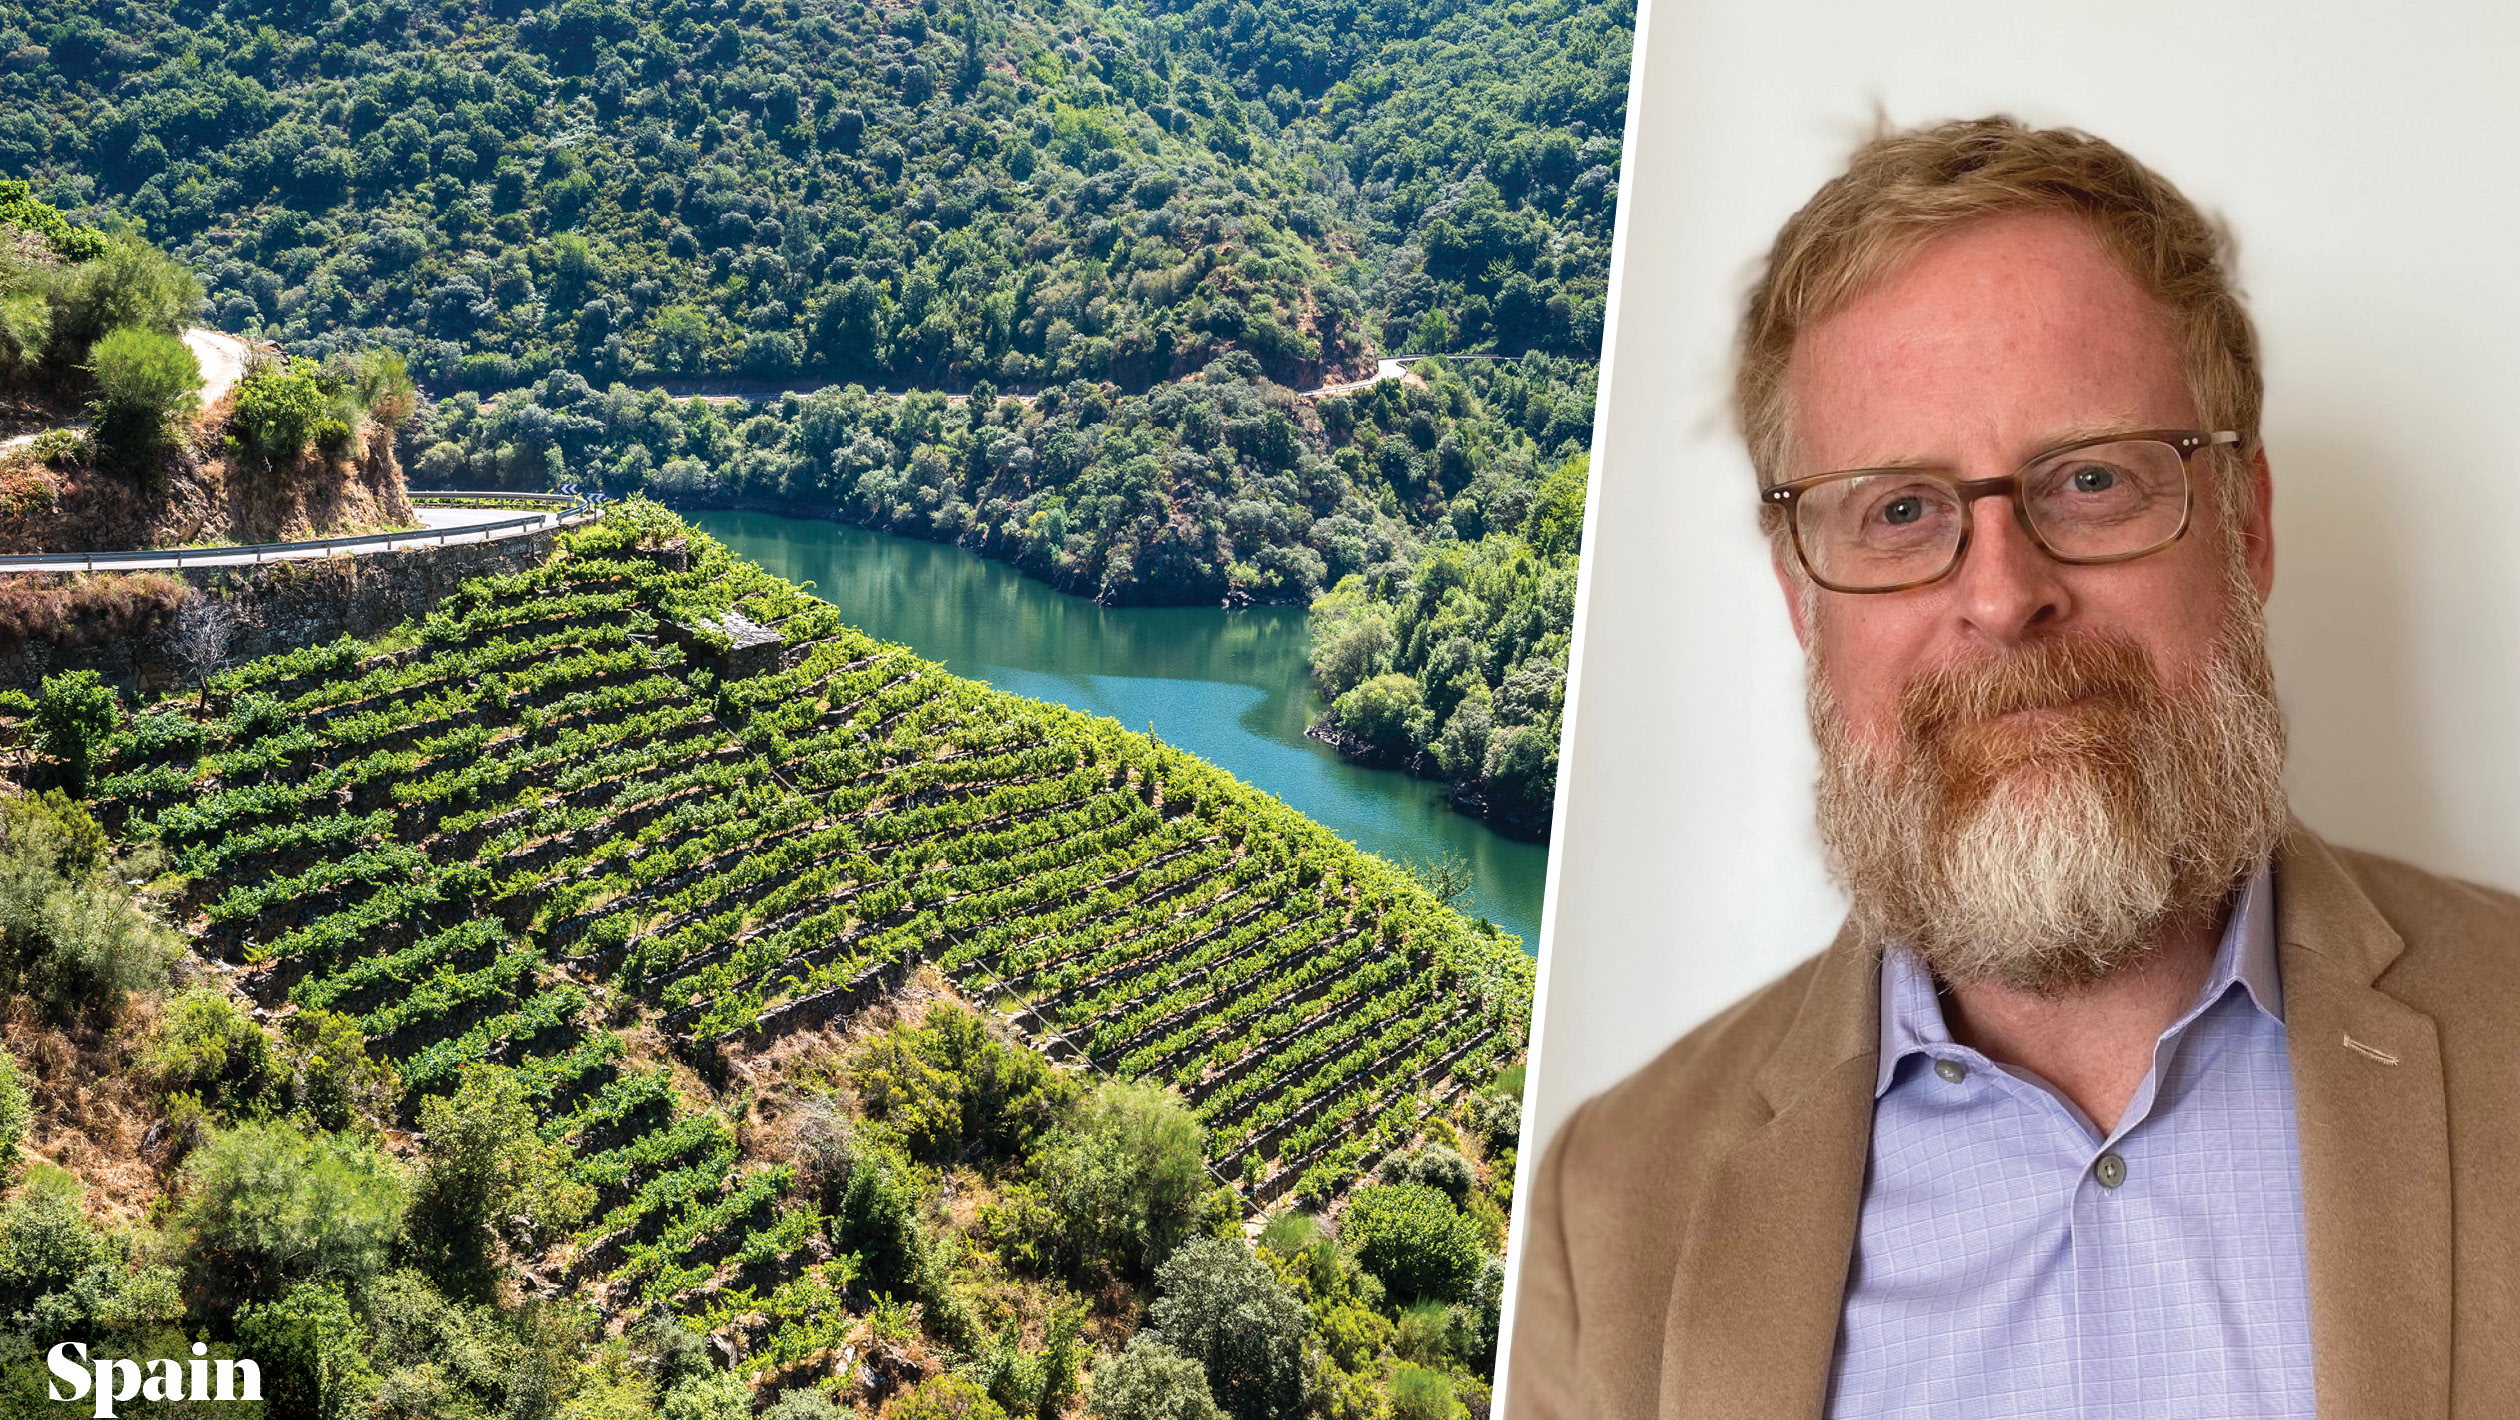 From left to right: the Galicia region of Spain (photo credit: Adobe Stock); David Weitzenhoffer, the founder and CEO of Community wines (photo credit: Nicholas Knight Studio).